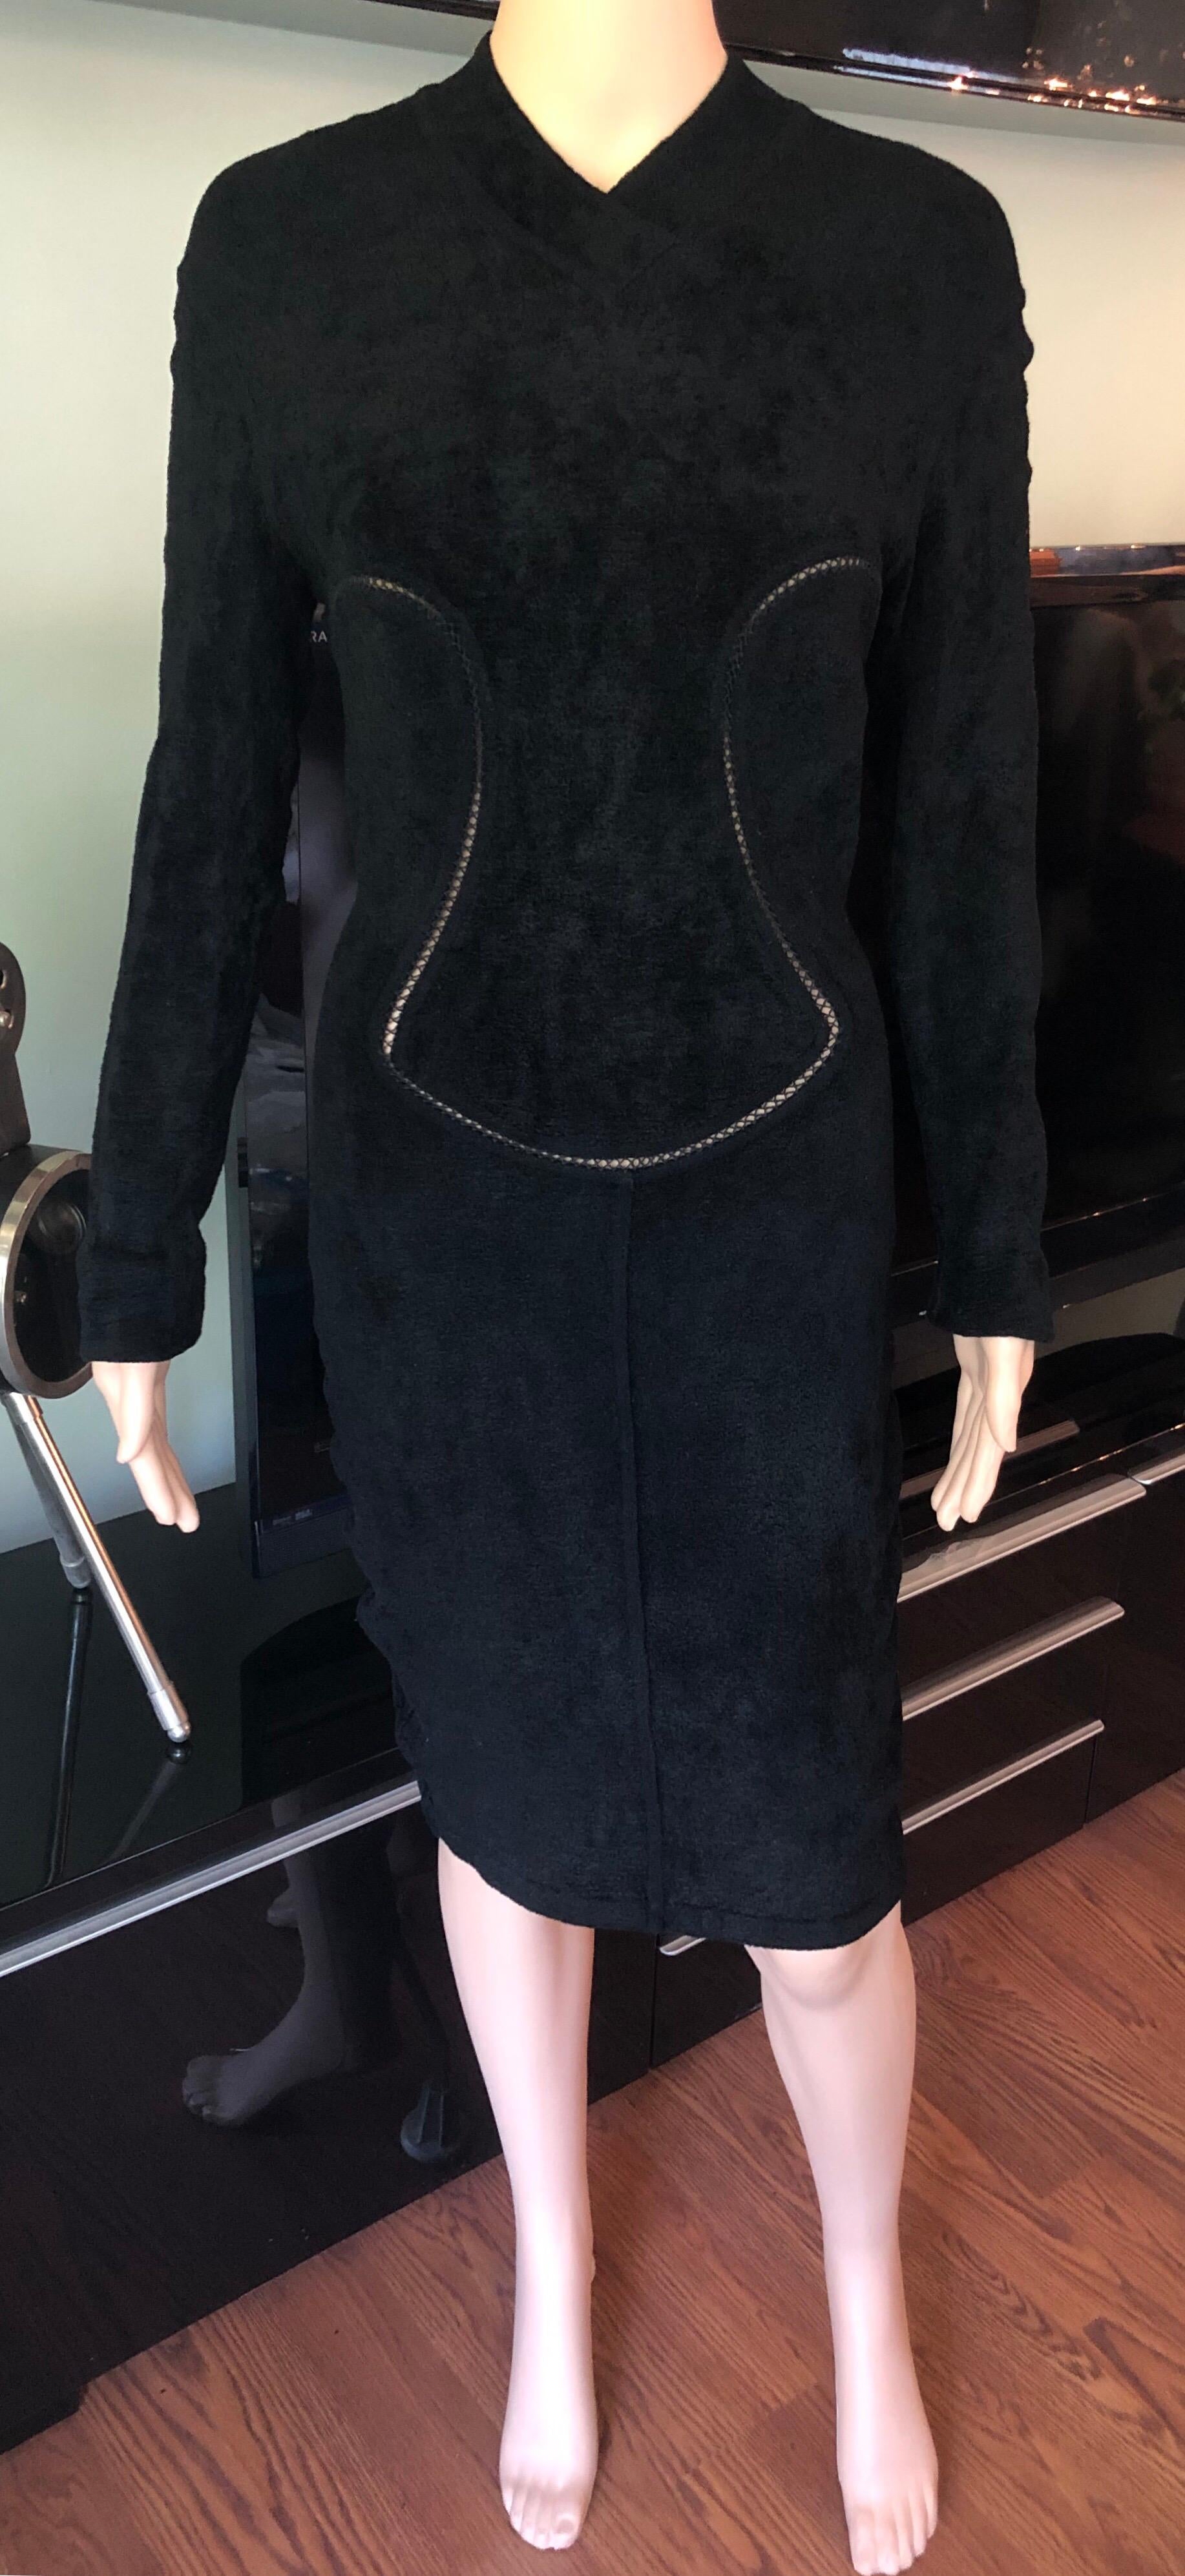 Azzedine Alaia F/W 1991 Vintage Bodycon Velvet Knit Black Dress Size M

Alaïa heavy knit velvet dress with open knit trim throughout, V-neck, long sleeves and concealed zip closure at center back.
